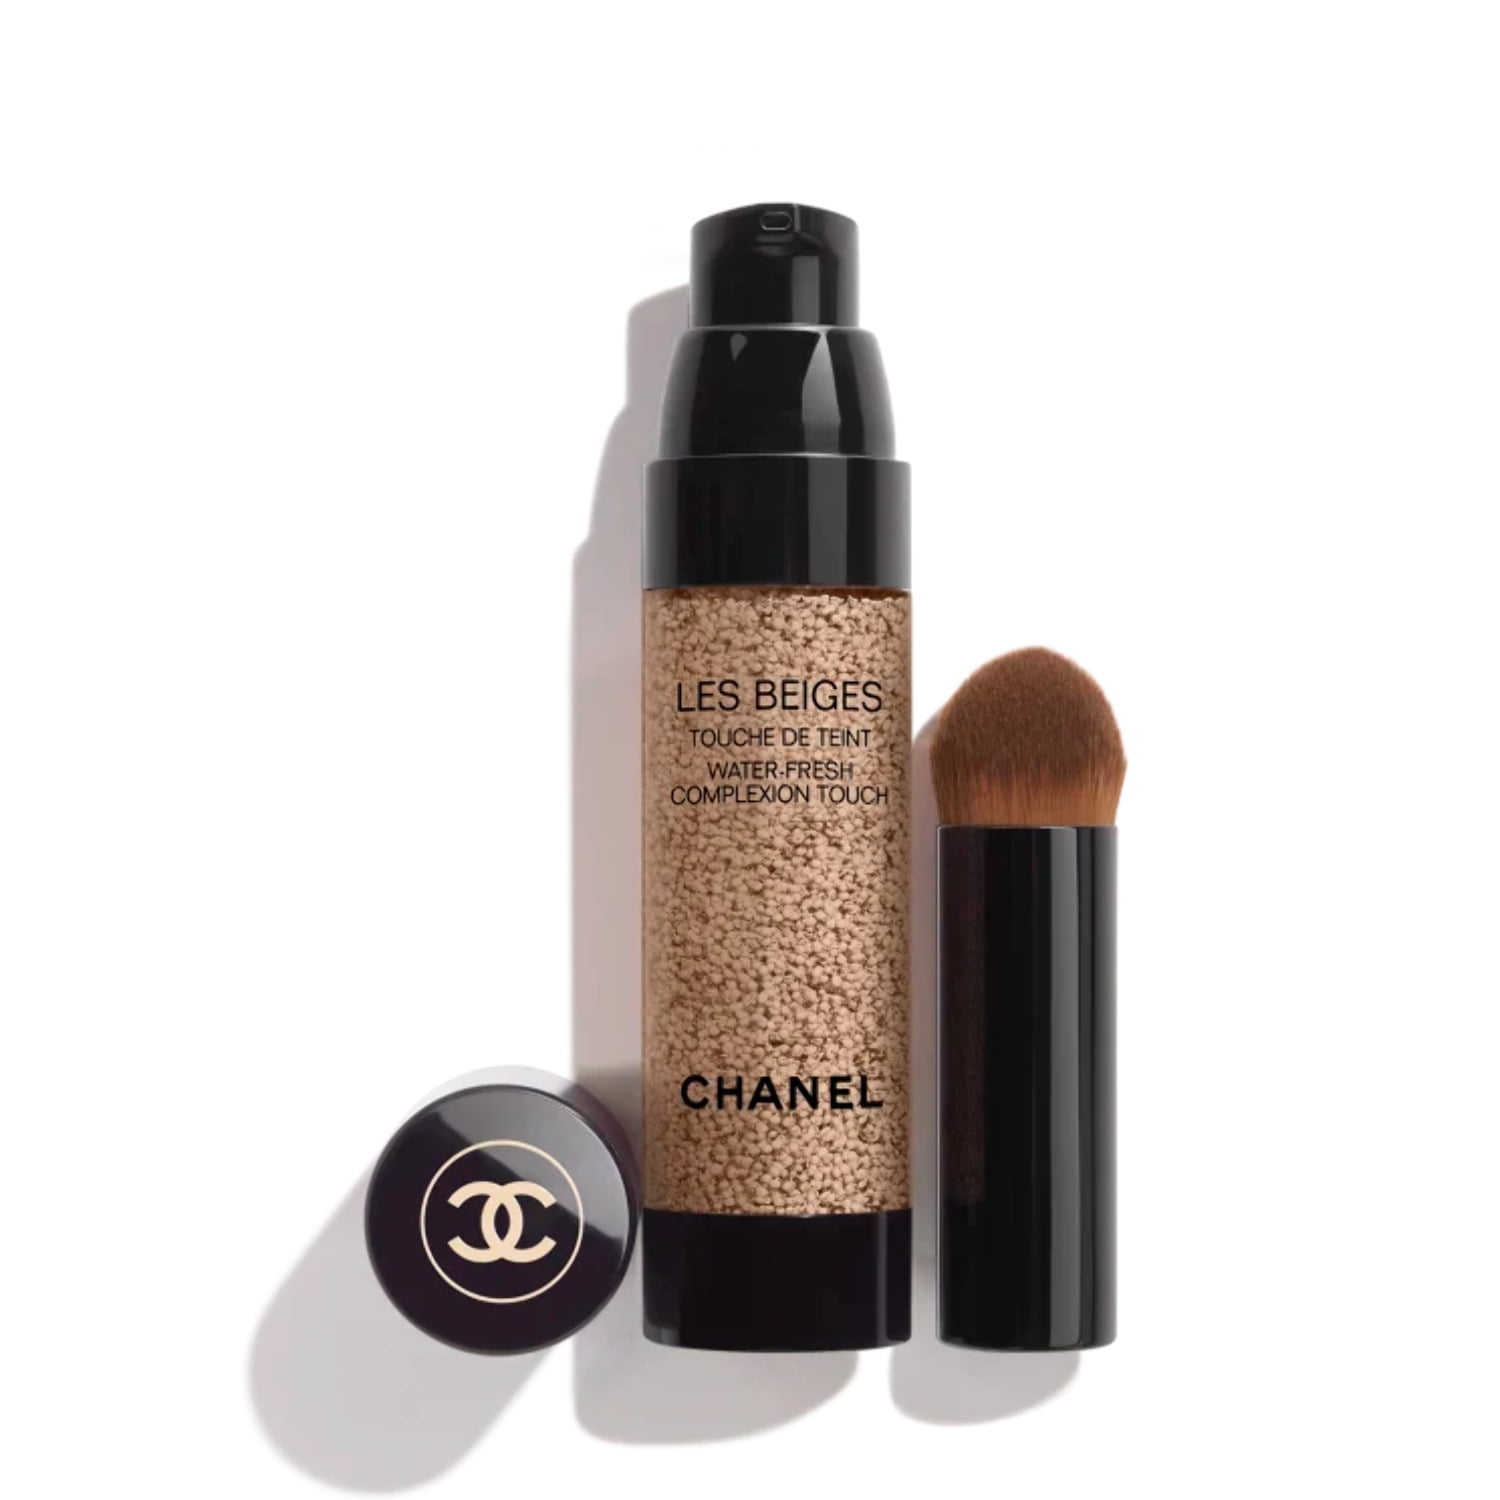 Chanel Les Beiges Water Fresh Complexion Touch 20ml 